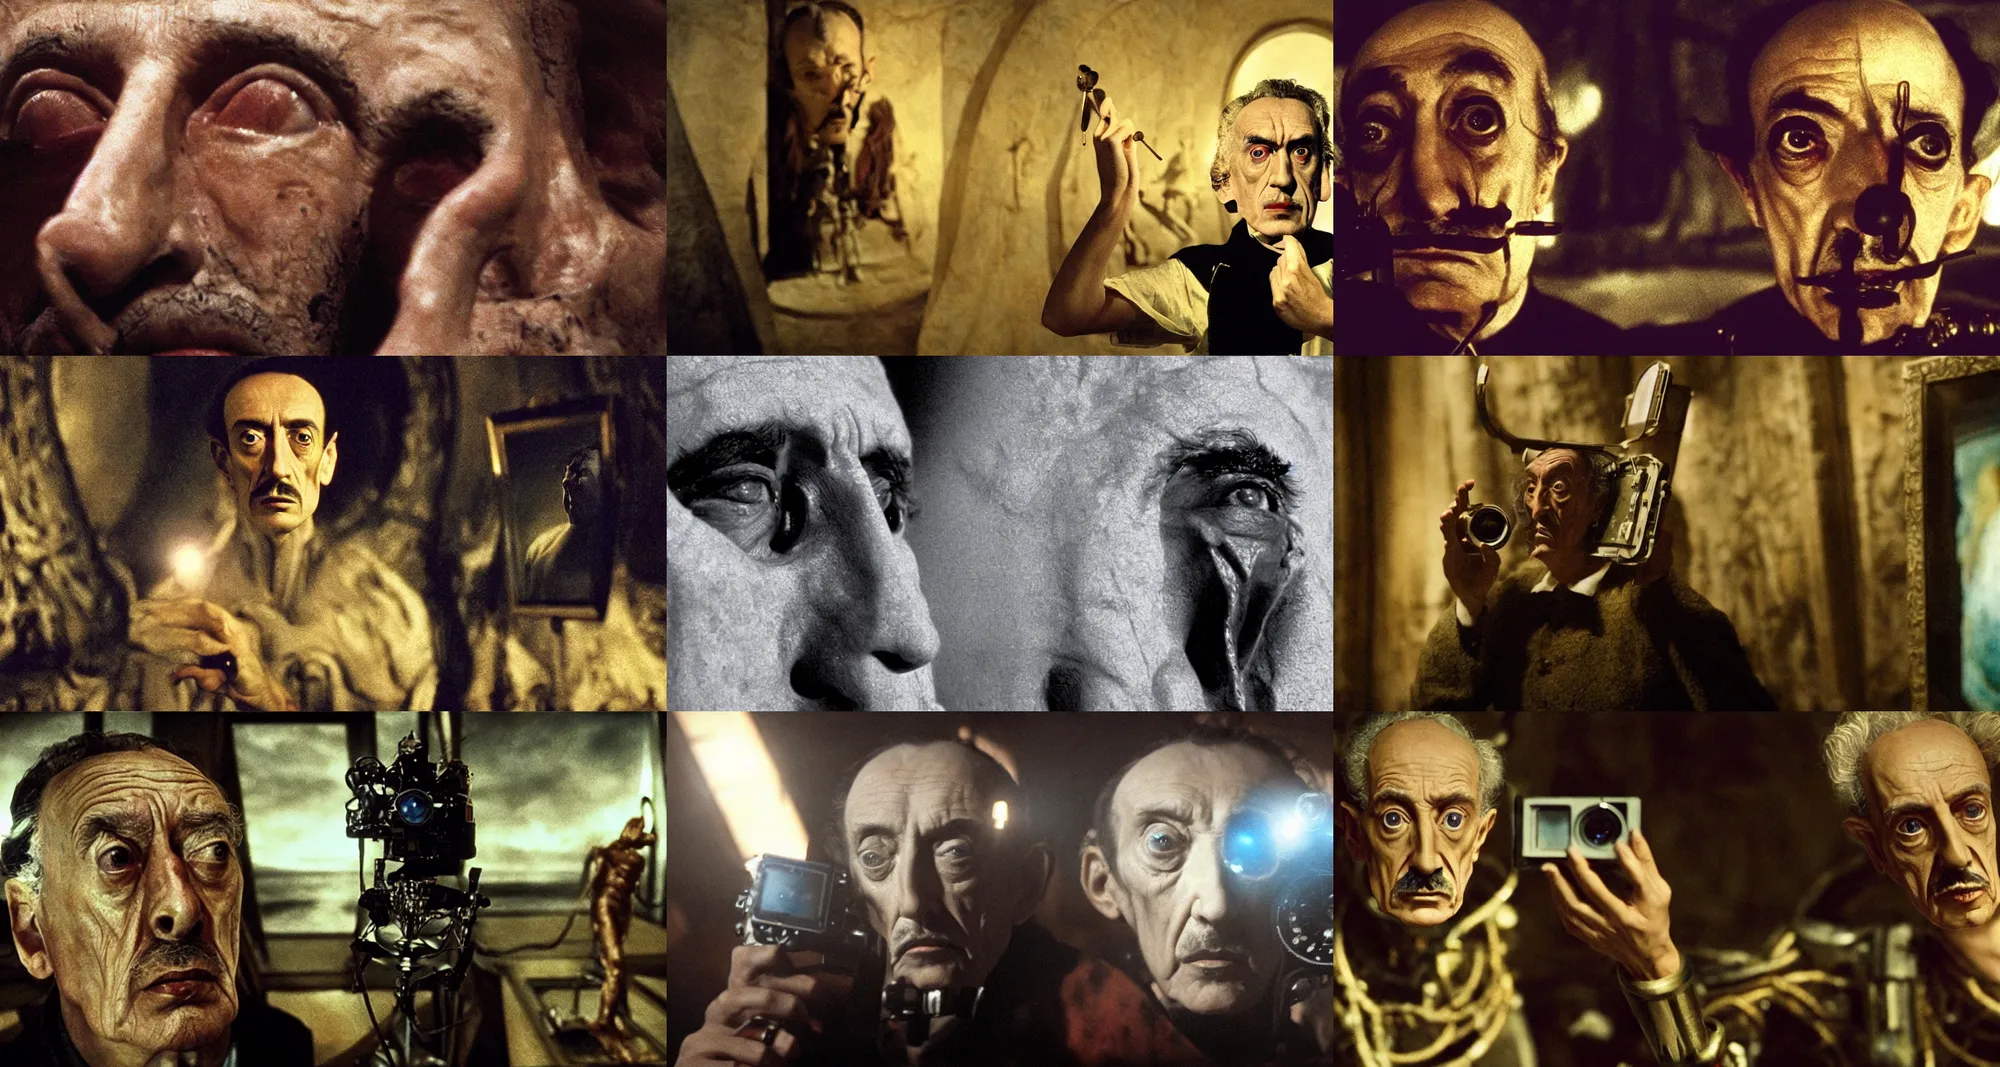 Prompt: the dali self - portrait as emperor | still frame from the prometheus movie by ridley scott with cinematogrophy of christopher doyle, arri alexa, anamorphic bokeh and lens flares, 8 k, higly detailed masterpiece